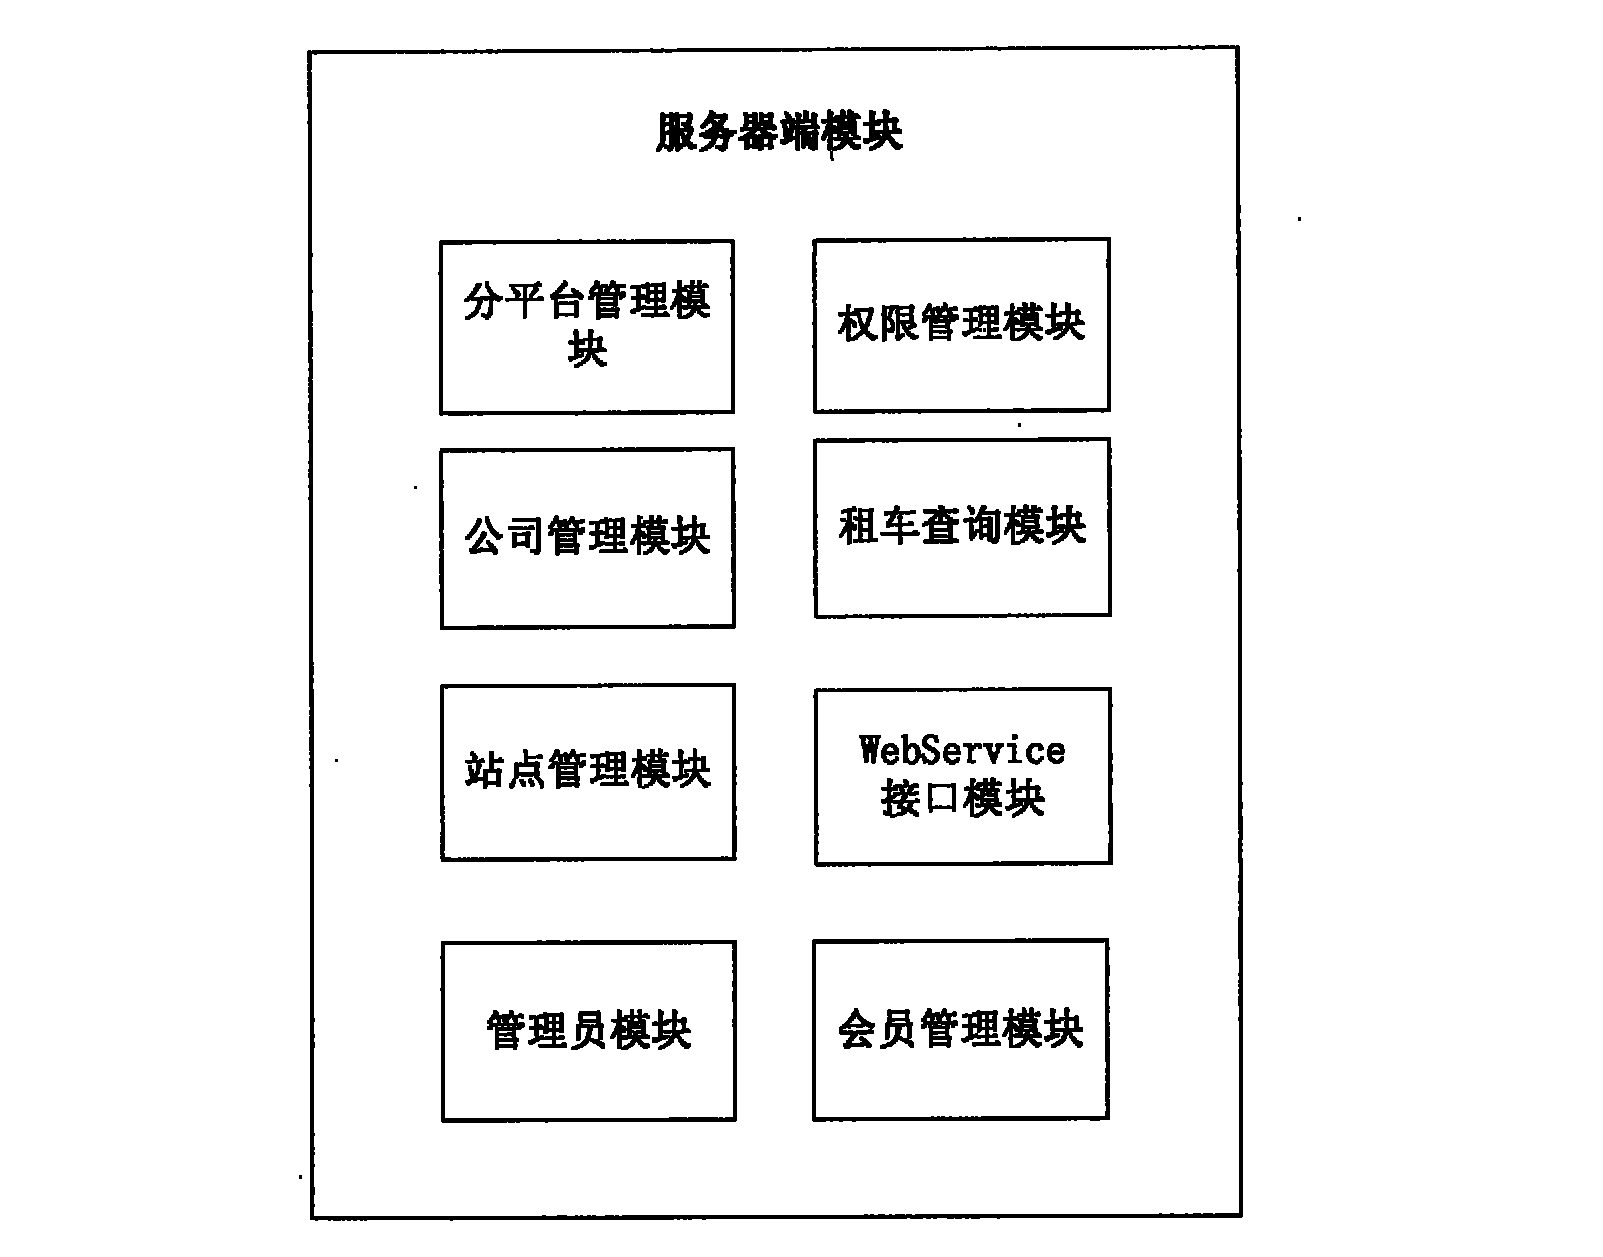 Managing system and method for cellphone application in mobile lease and restitution of vehicle